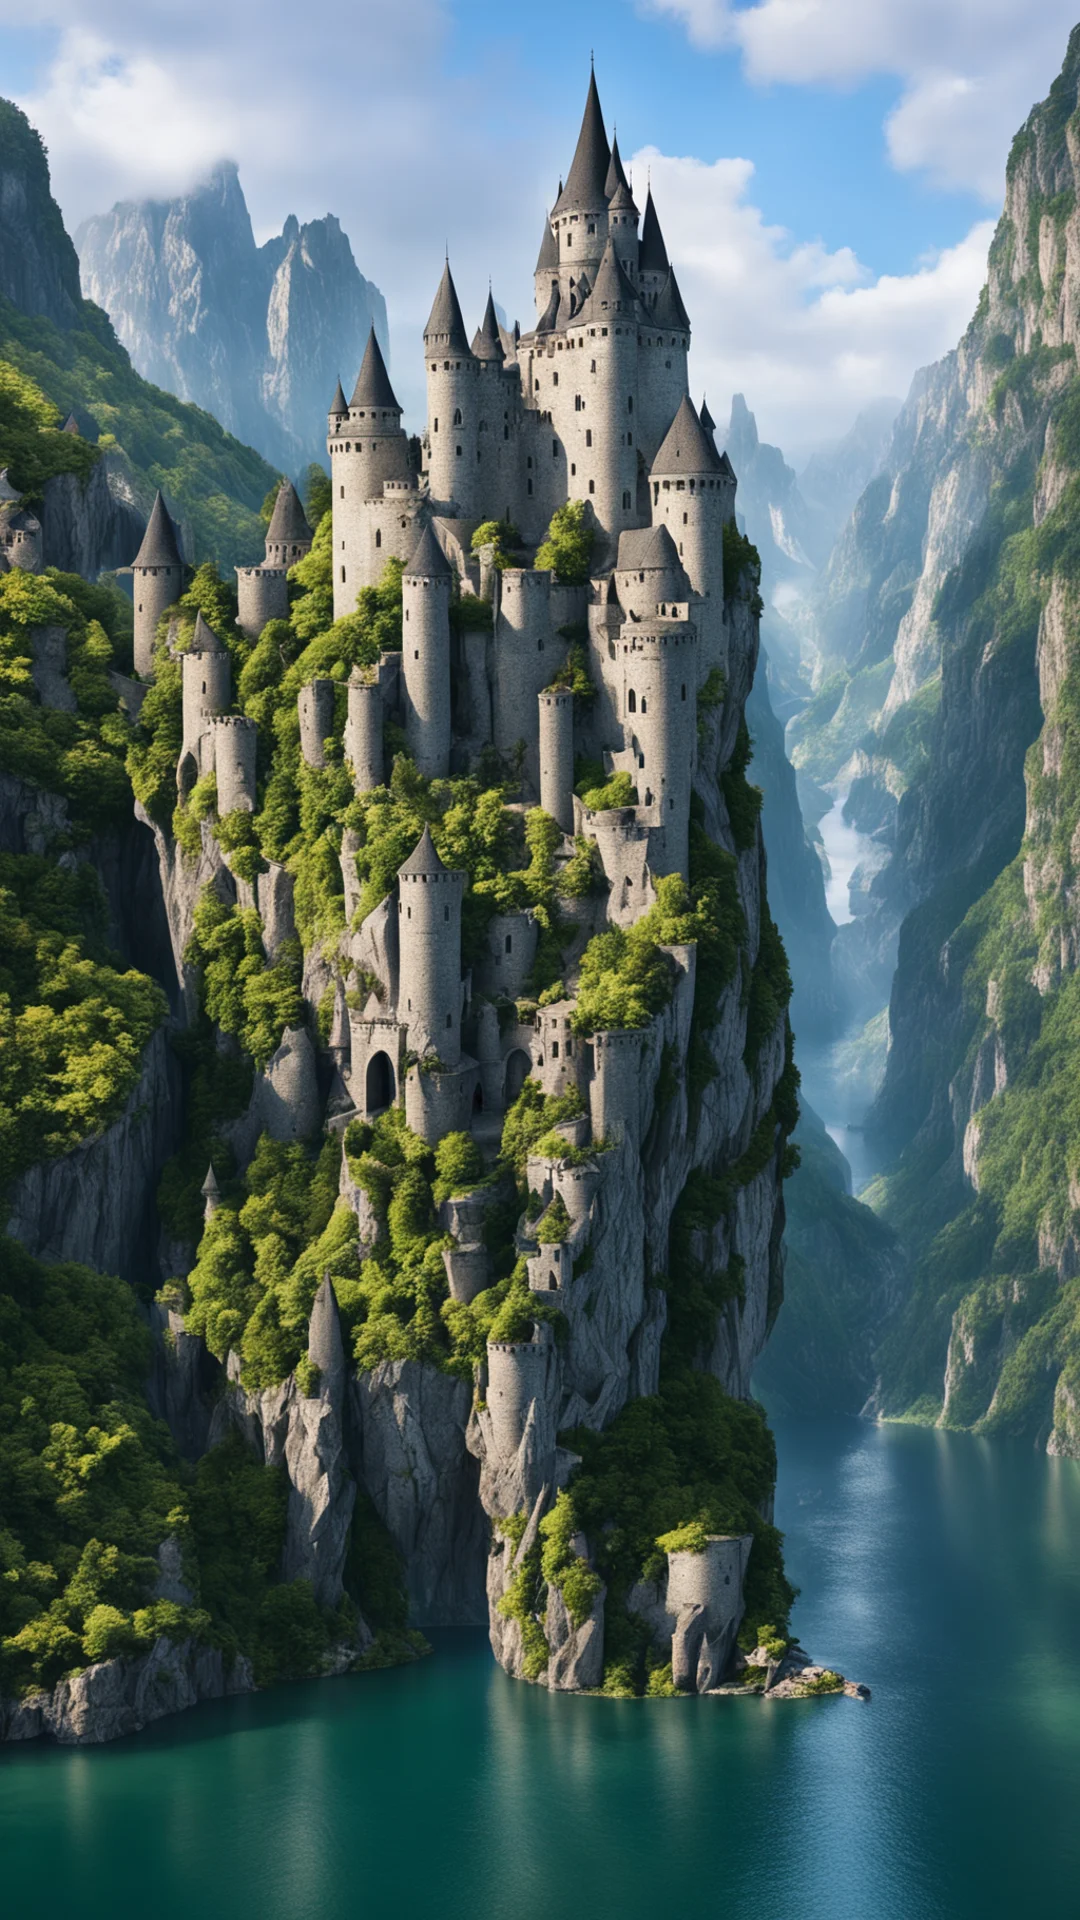 epic cliffs castle over lake large spiraling towers on castle epic shot realistic confident engaging wow artstation art 3 tall